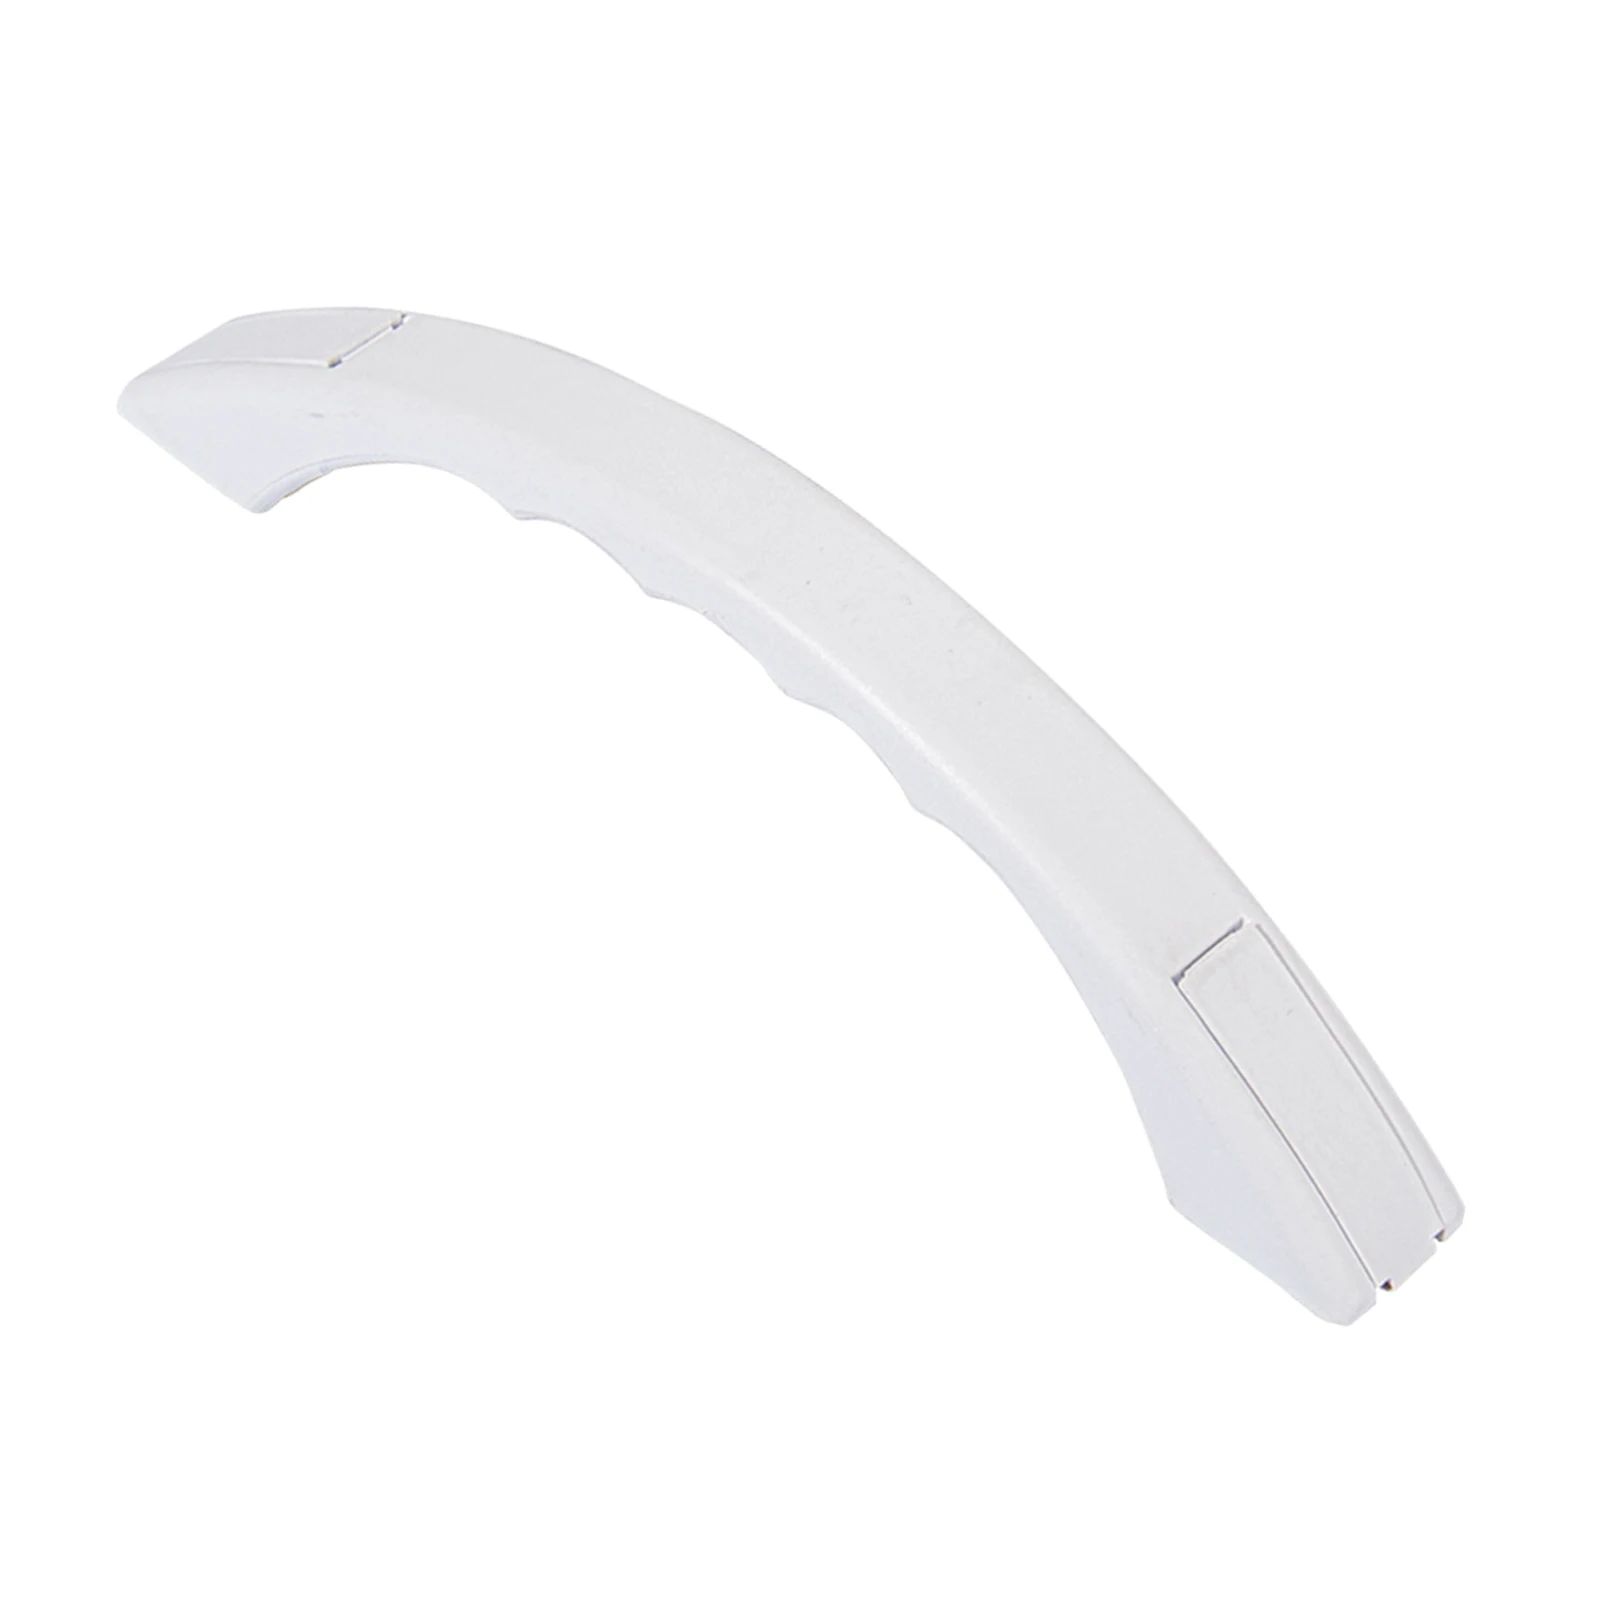 Plastic Grab Handle Entry Door Assist Bar Weather Resistant Entry Step Support Grab Bar for RV Trailer Motor Home Replacement